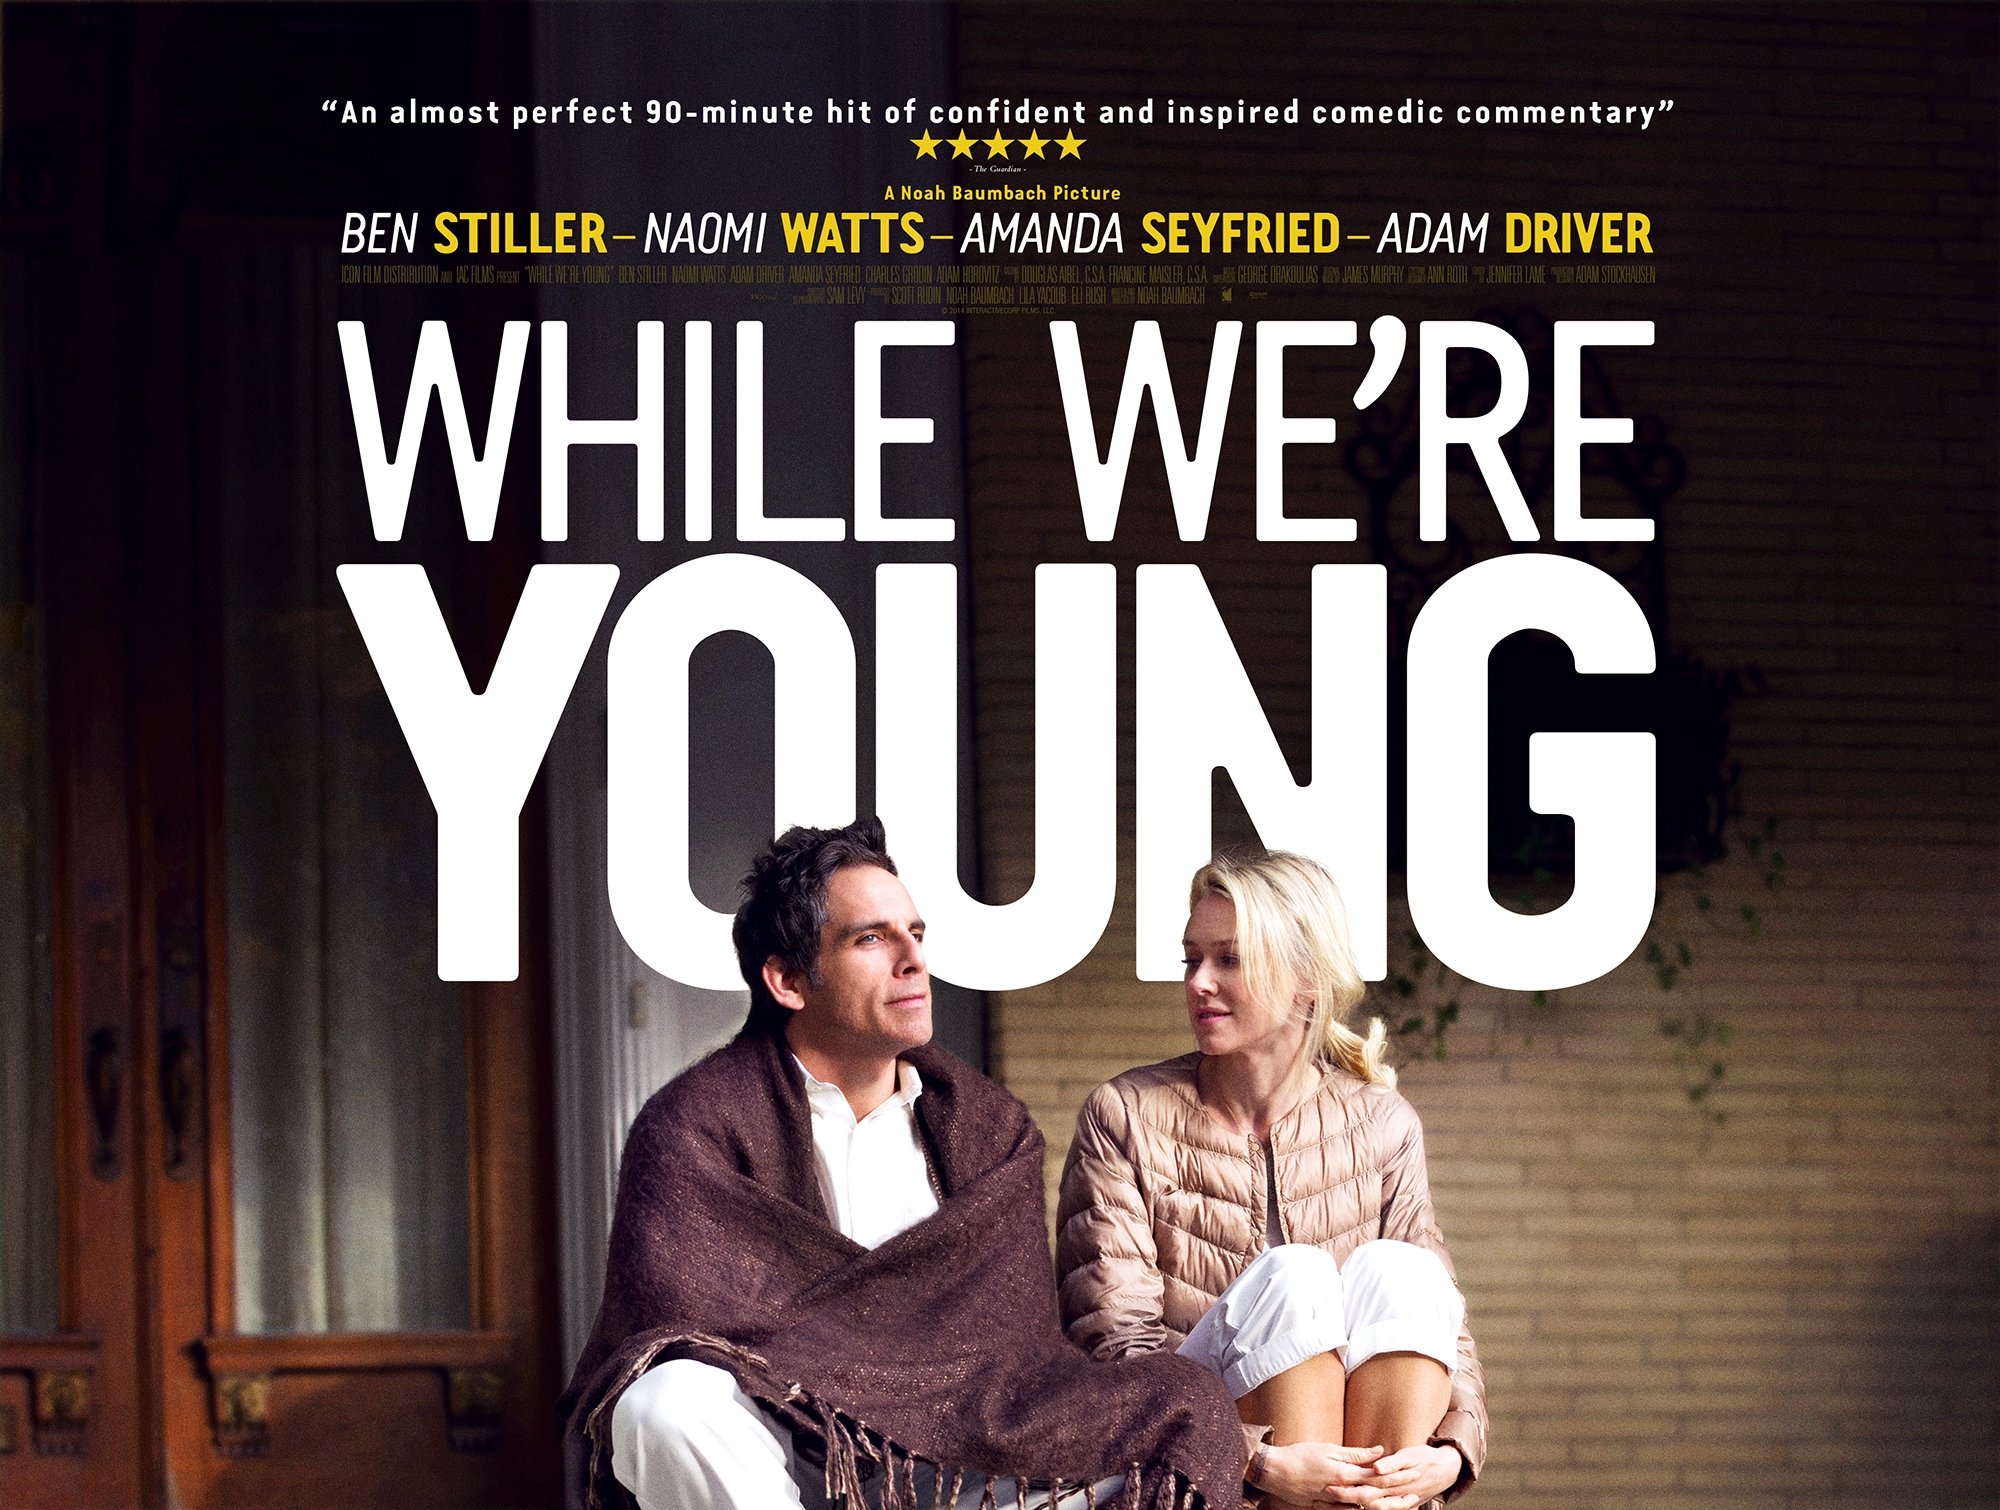 while_we_reyoung-poster